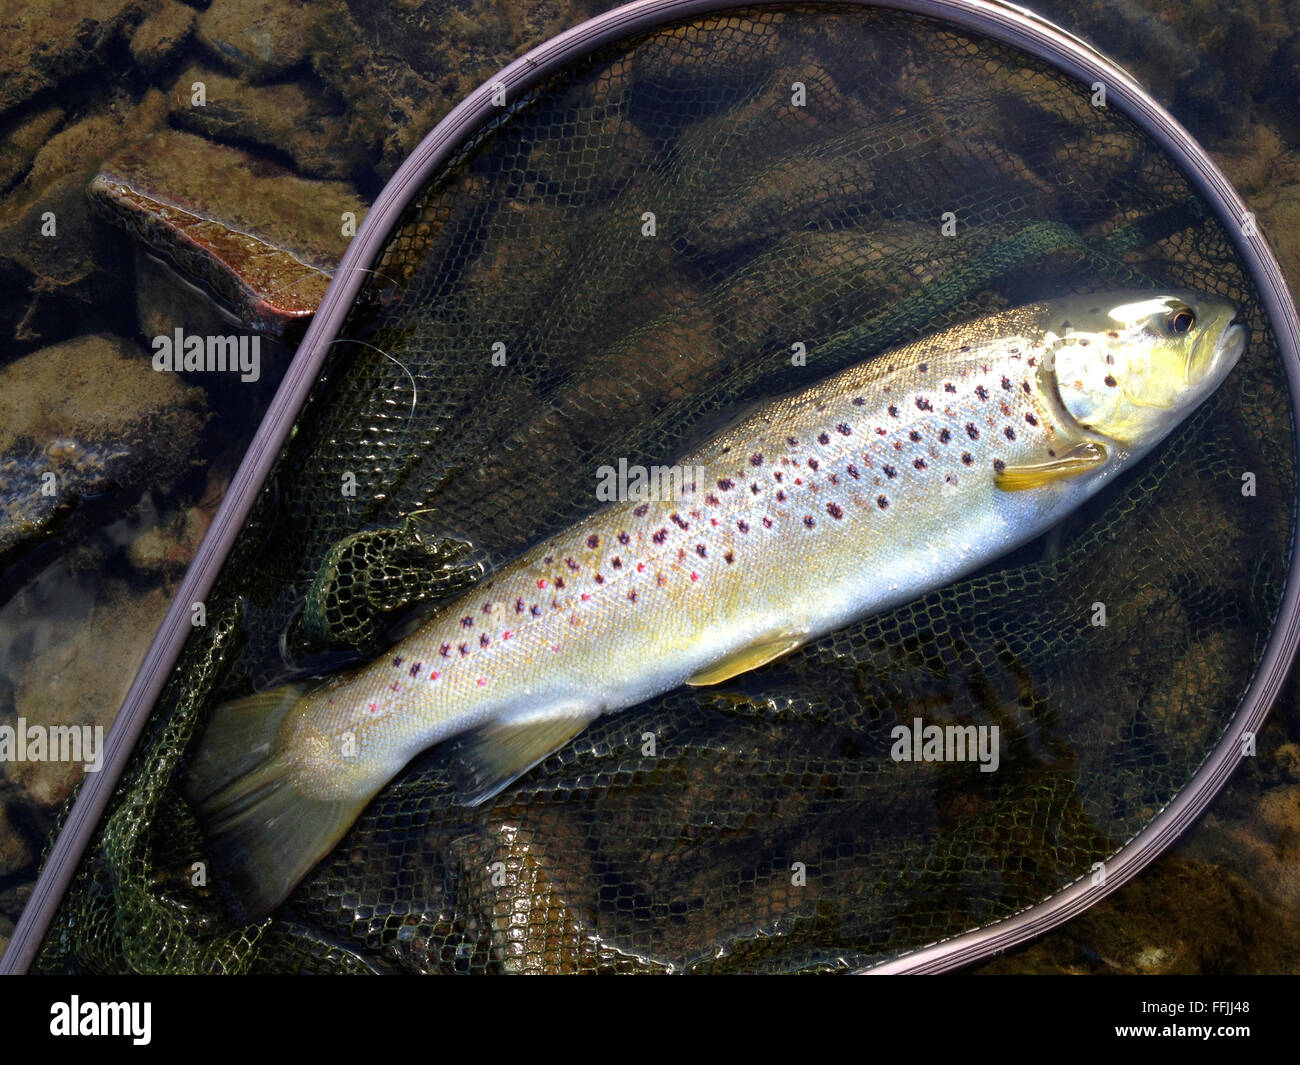 Wild brown trout caught from River Wye while fly fishing at The Warren  Hay-on-Wye Powys Wales UK. The fishery has a rule of catch and release  returning these wild fish to the